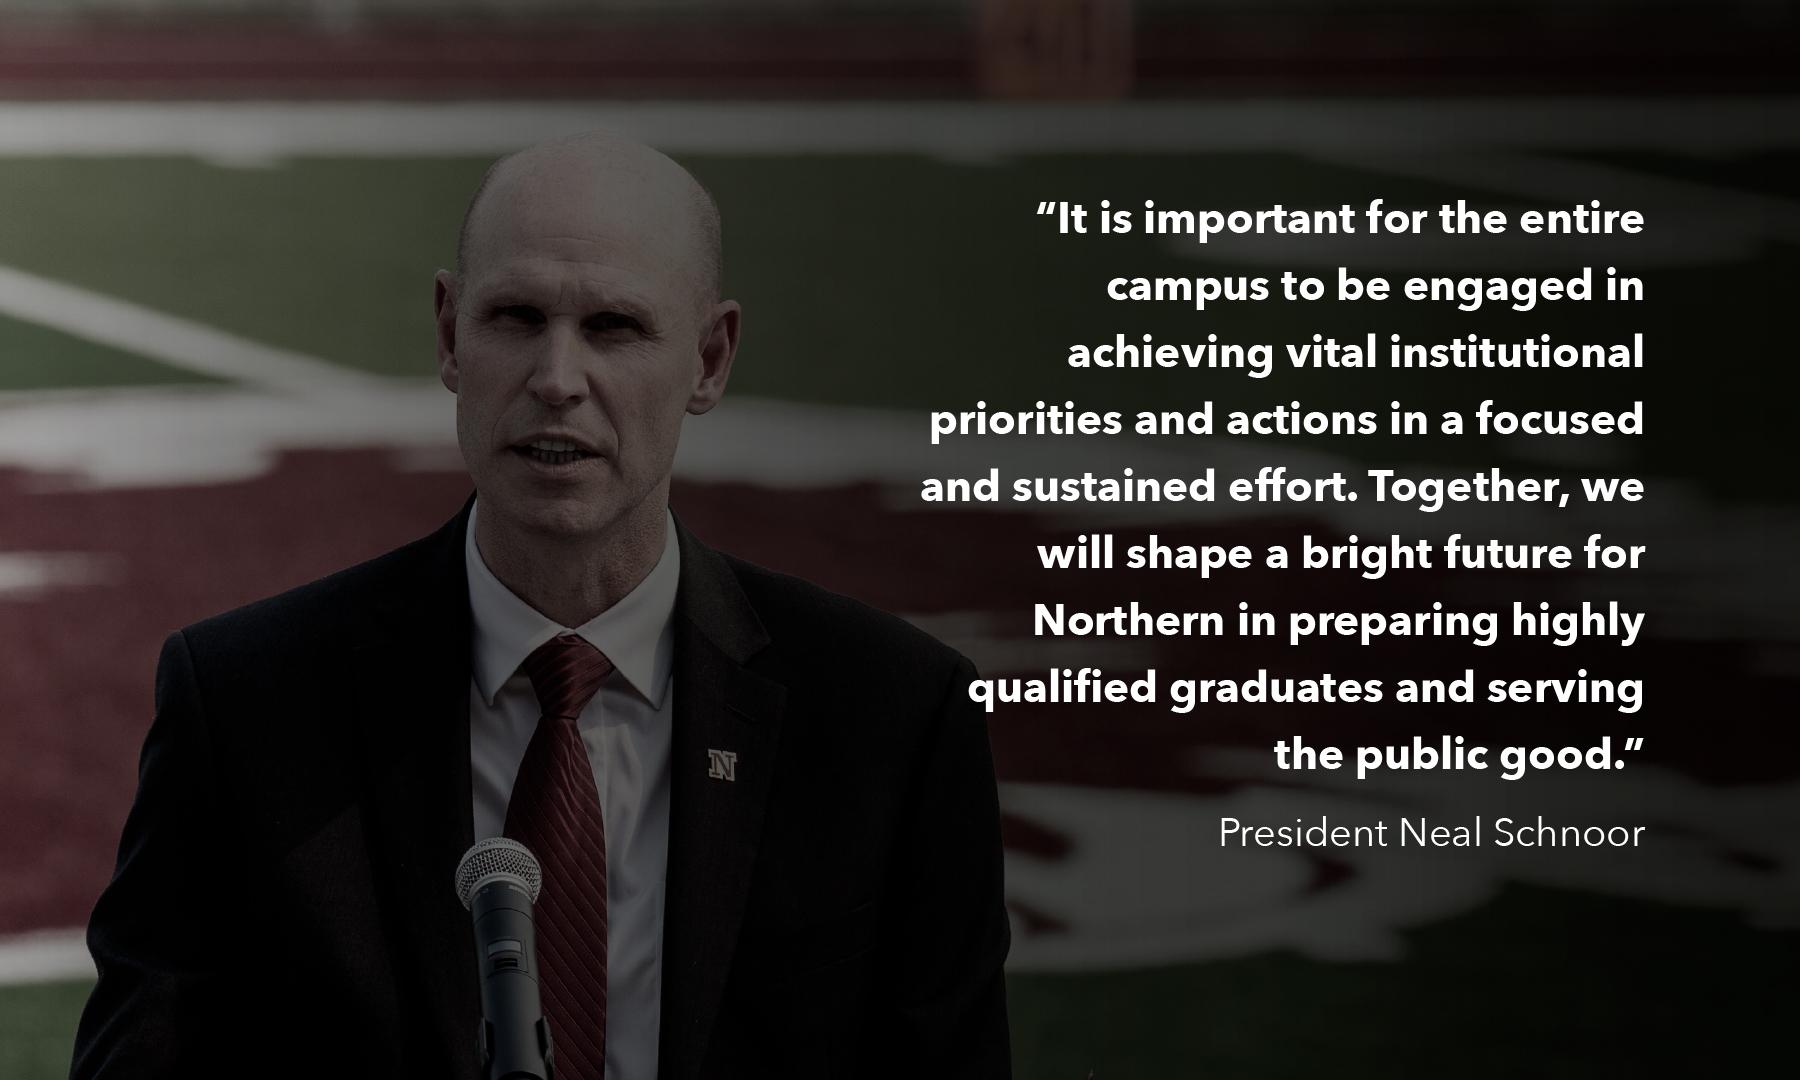 A photo of President Schnoor speaking outside: It is important for the entire campus to be engaged in achieving vital institutional priorities and actions in a focused and sustained effort. Together, we will shape a bright future for Northern in preparing highly qualified graduates and serving the public good.